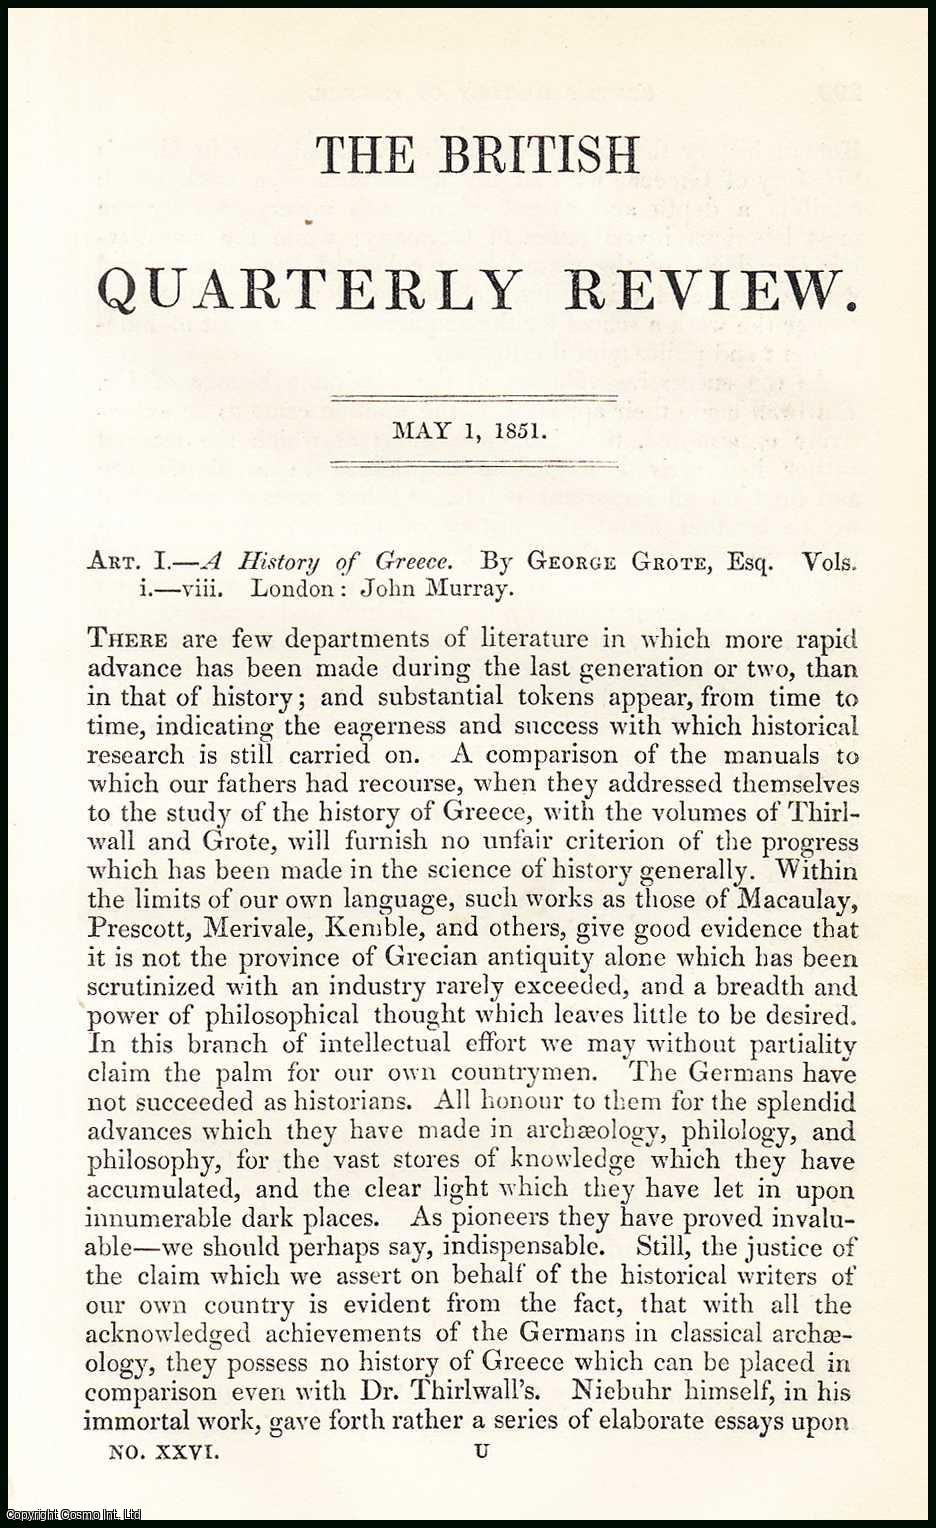 G. C. Lewis - A History of Greece, by George Grote. A rare original article from the British Quarterly Review, 1851.